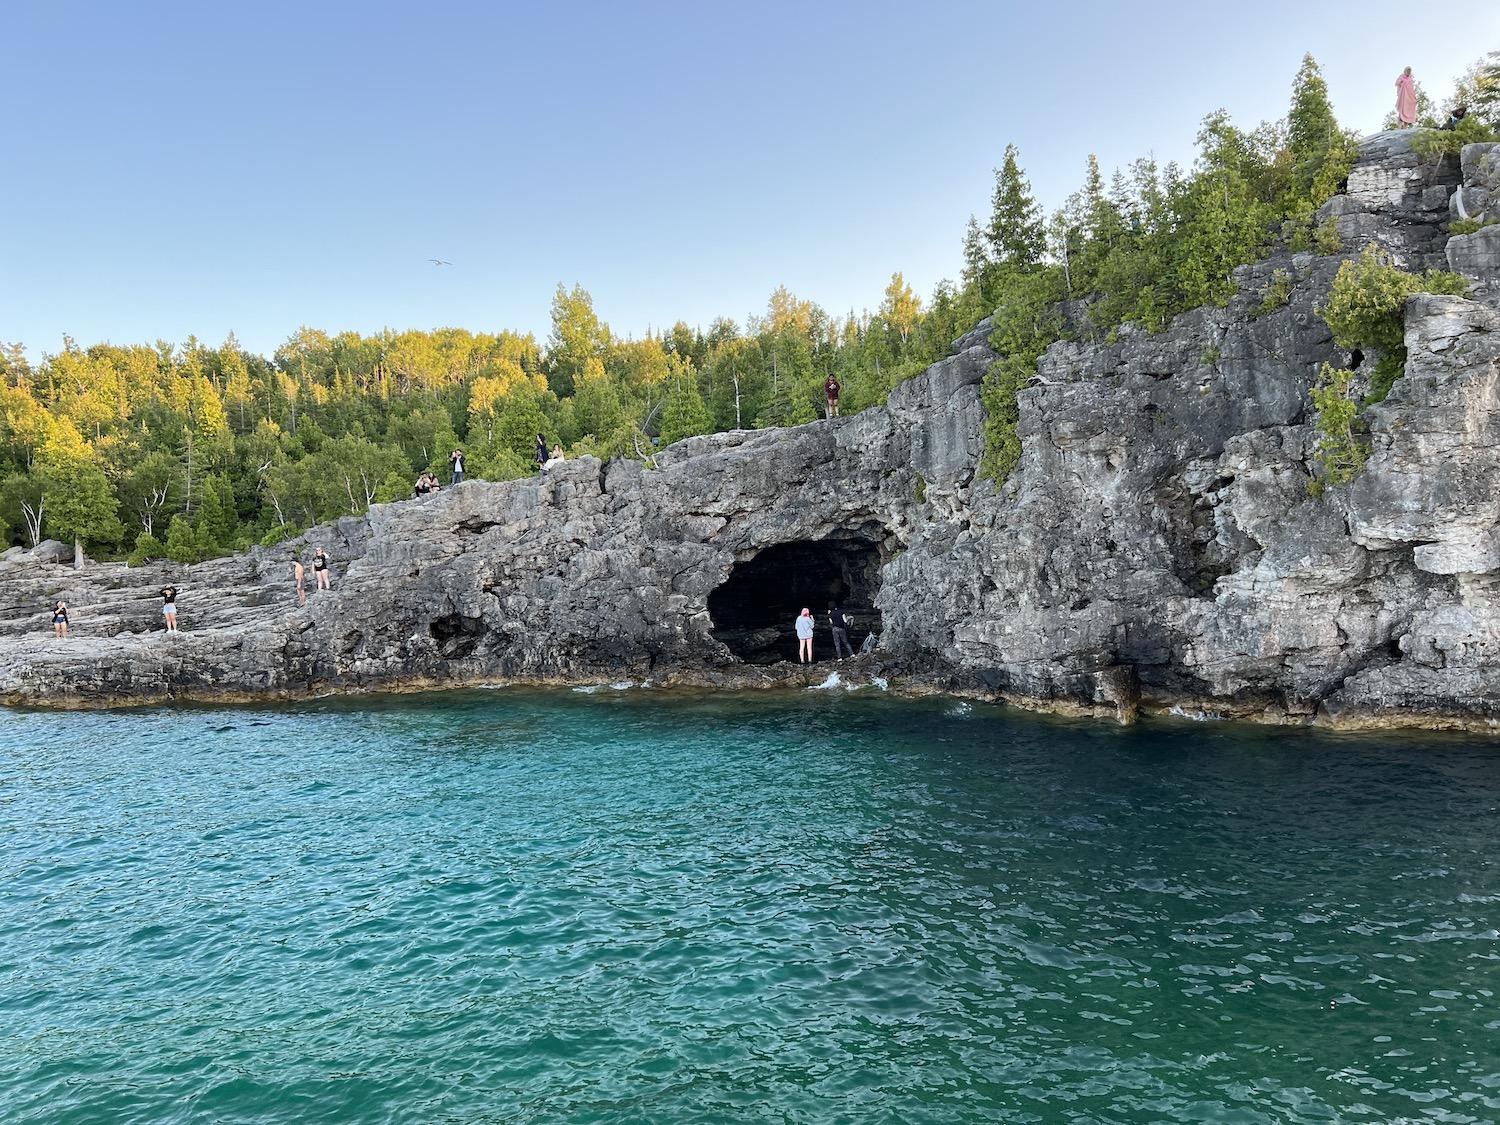 Another view from the sunset cruise of people exploring the Grotto area of Bruce Peninsula National Park.